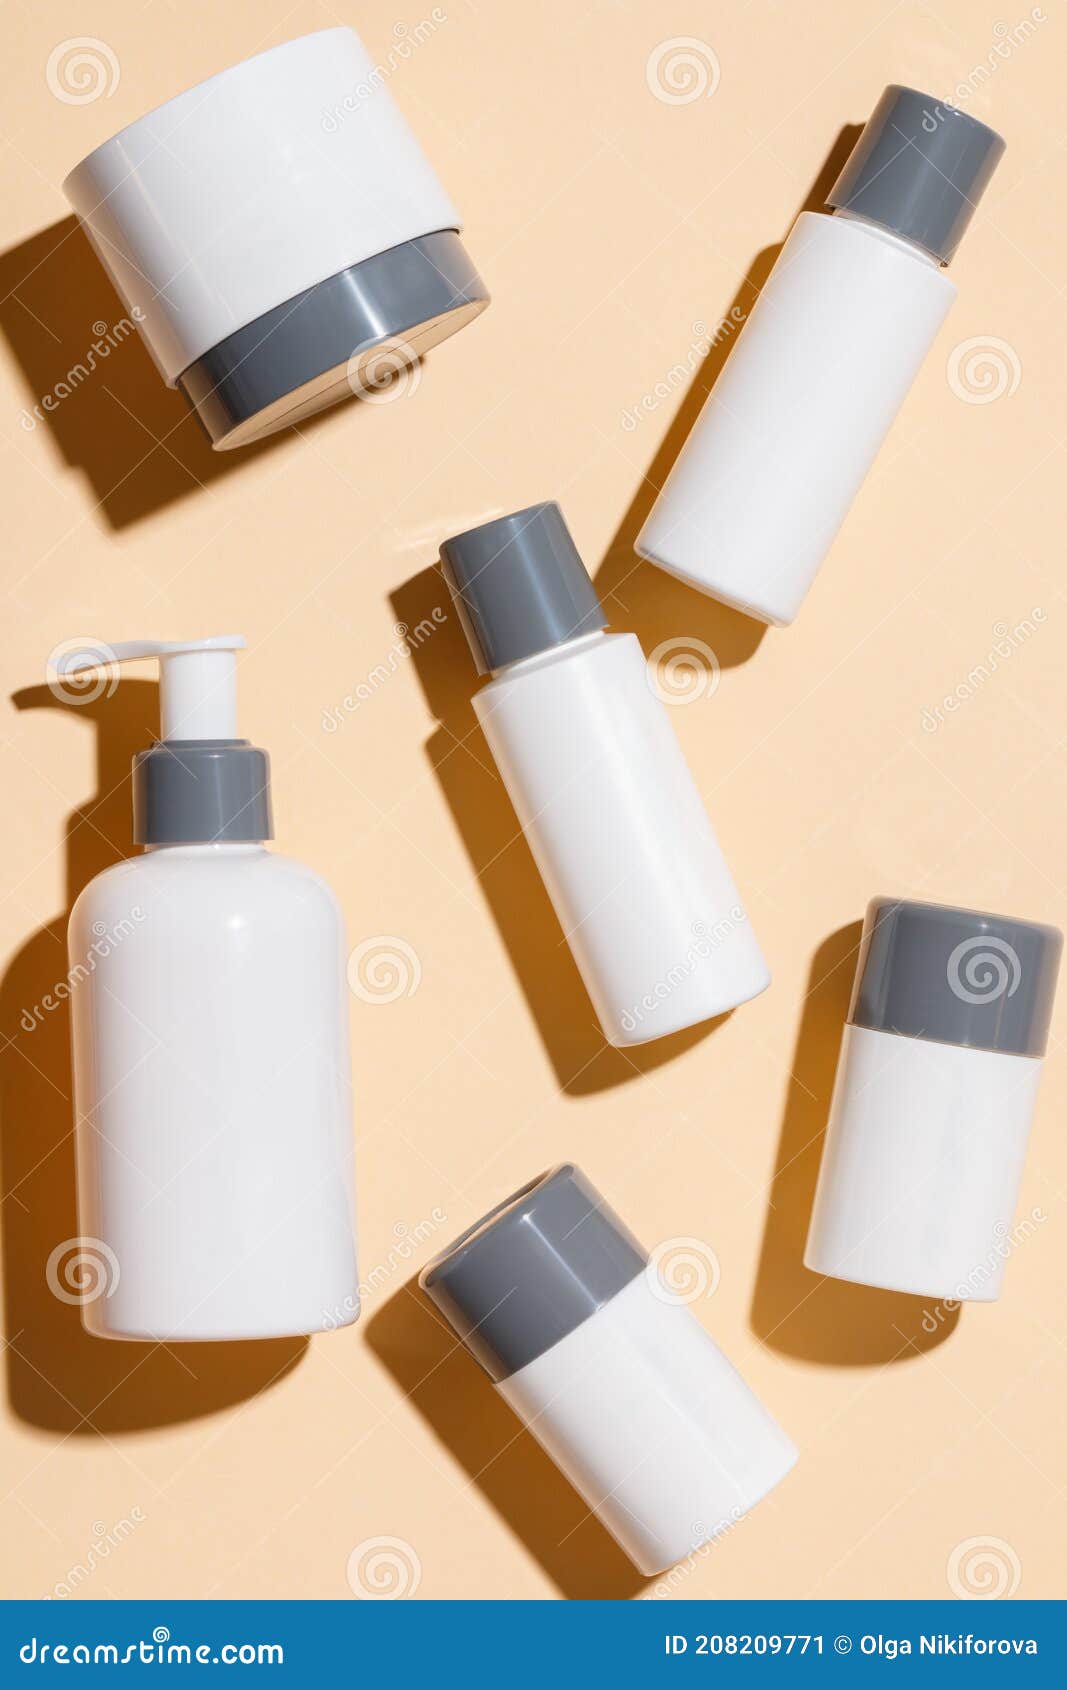 cosmetic products for skin care on a beige background. creams, serums, lotions with empty packaging. beauty and spa concept